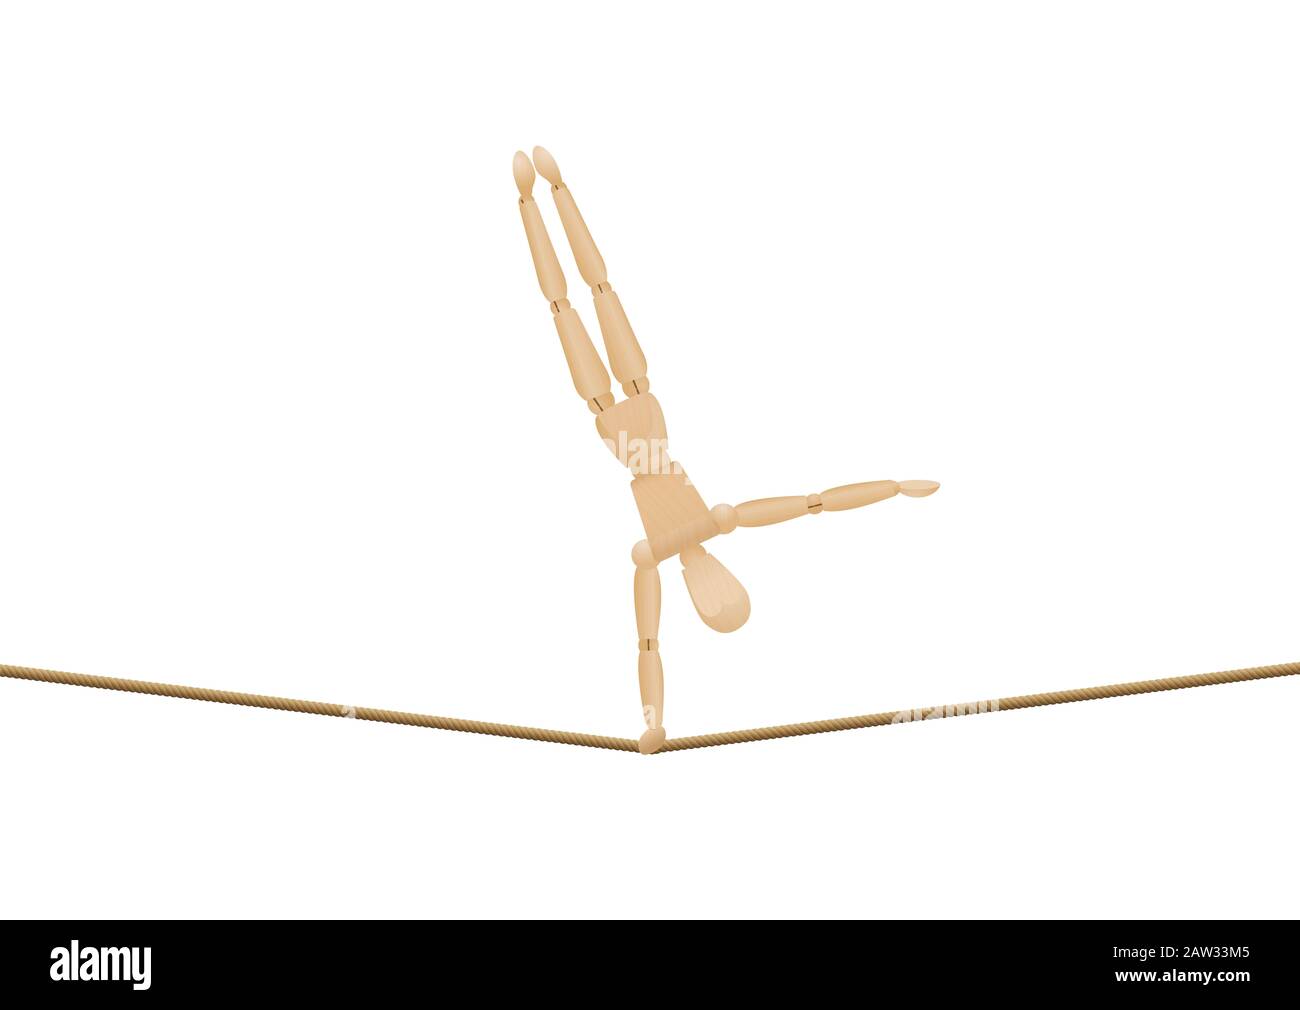 Tightrope walker making handstand with one hand. Balancing athletic wooden mannequin, lay figure, on a long rope - illustration on white. Stock Photo